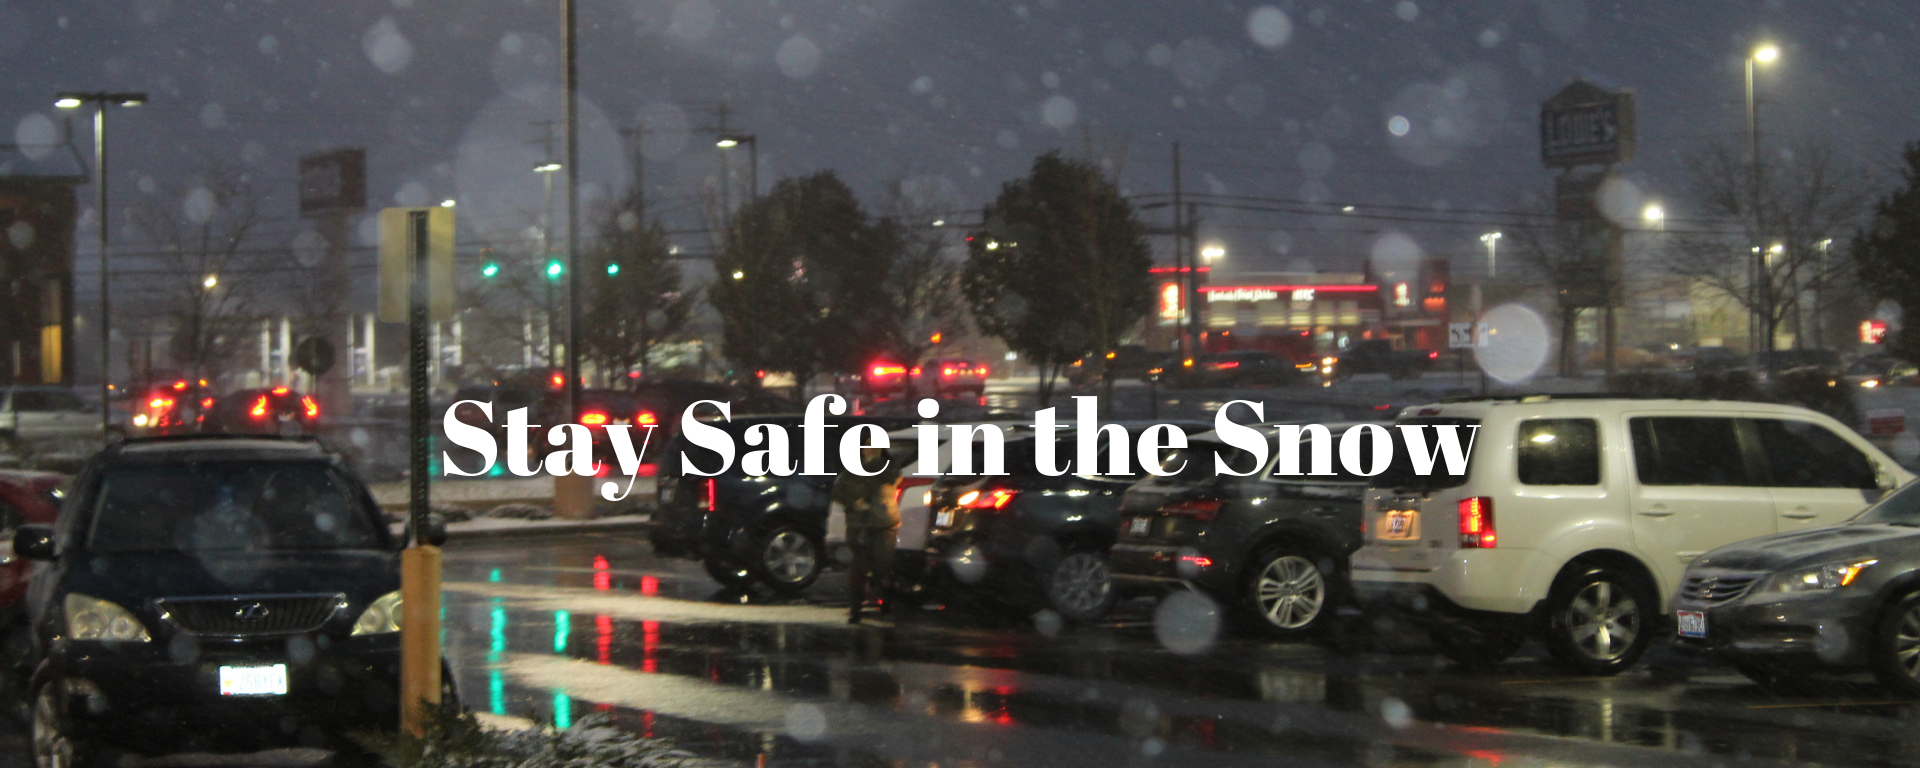 Stay Safe in the Snow